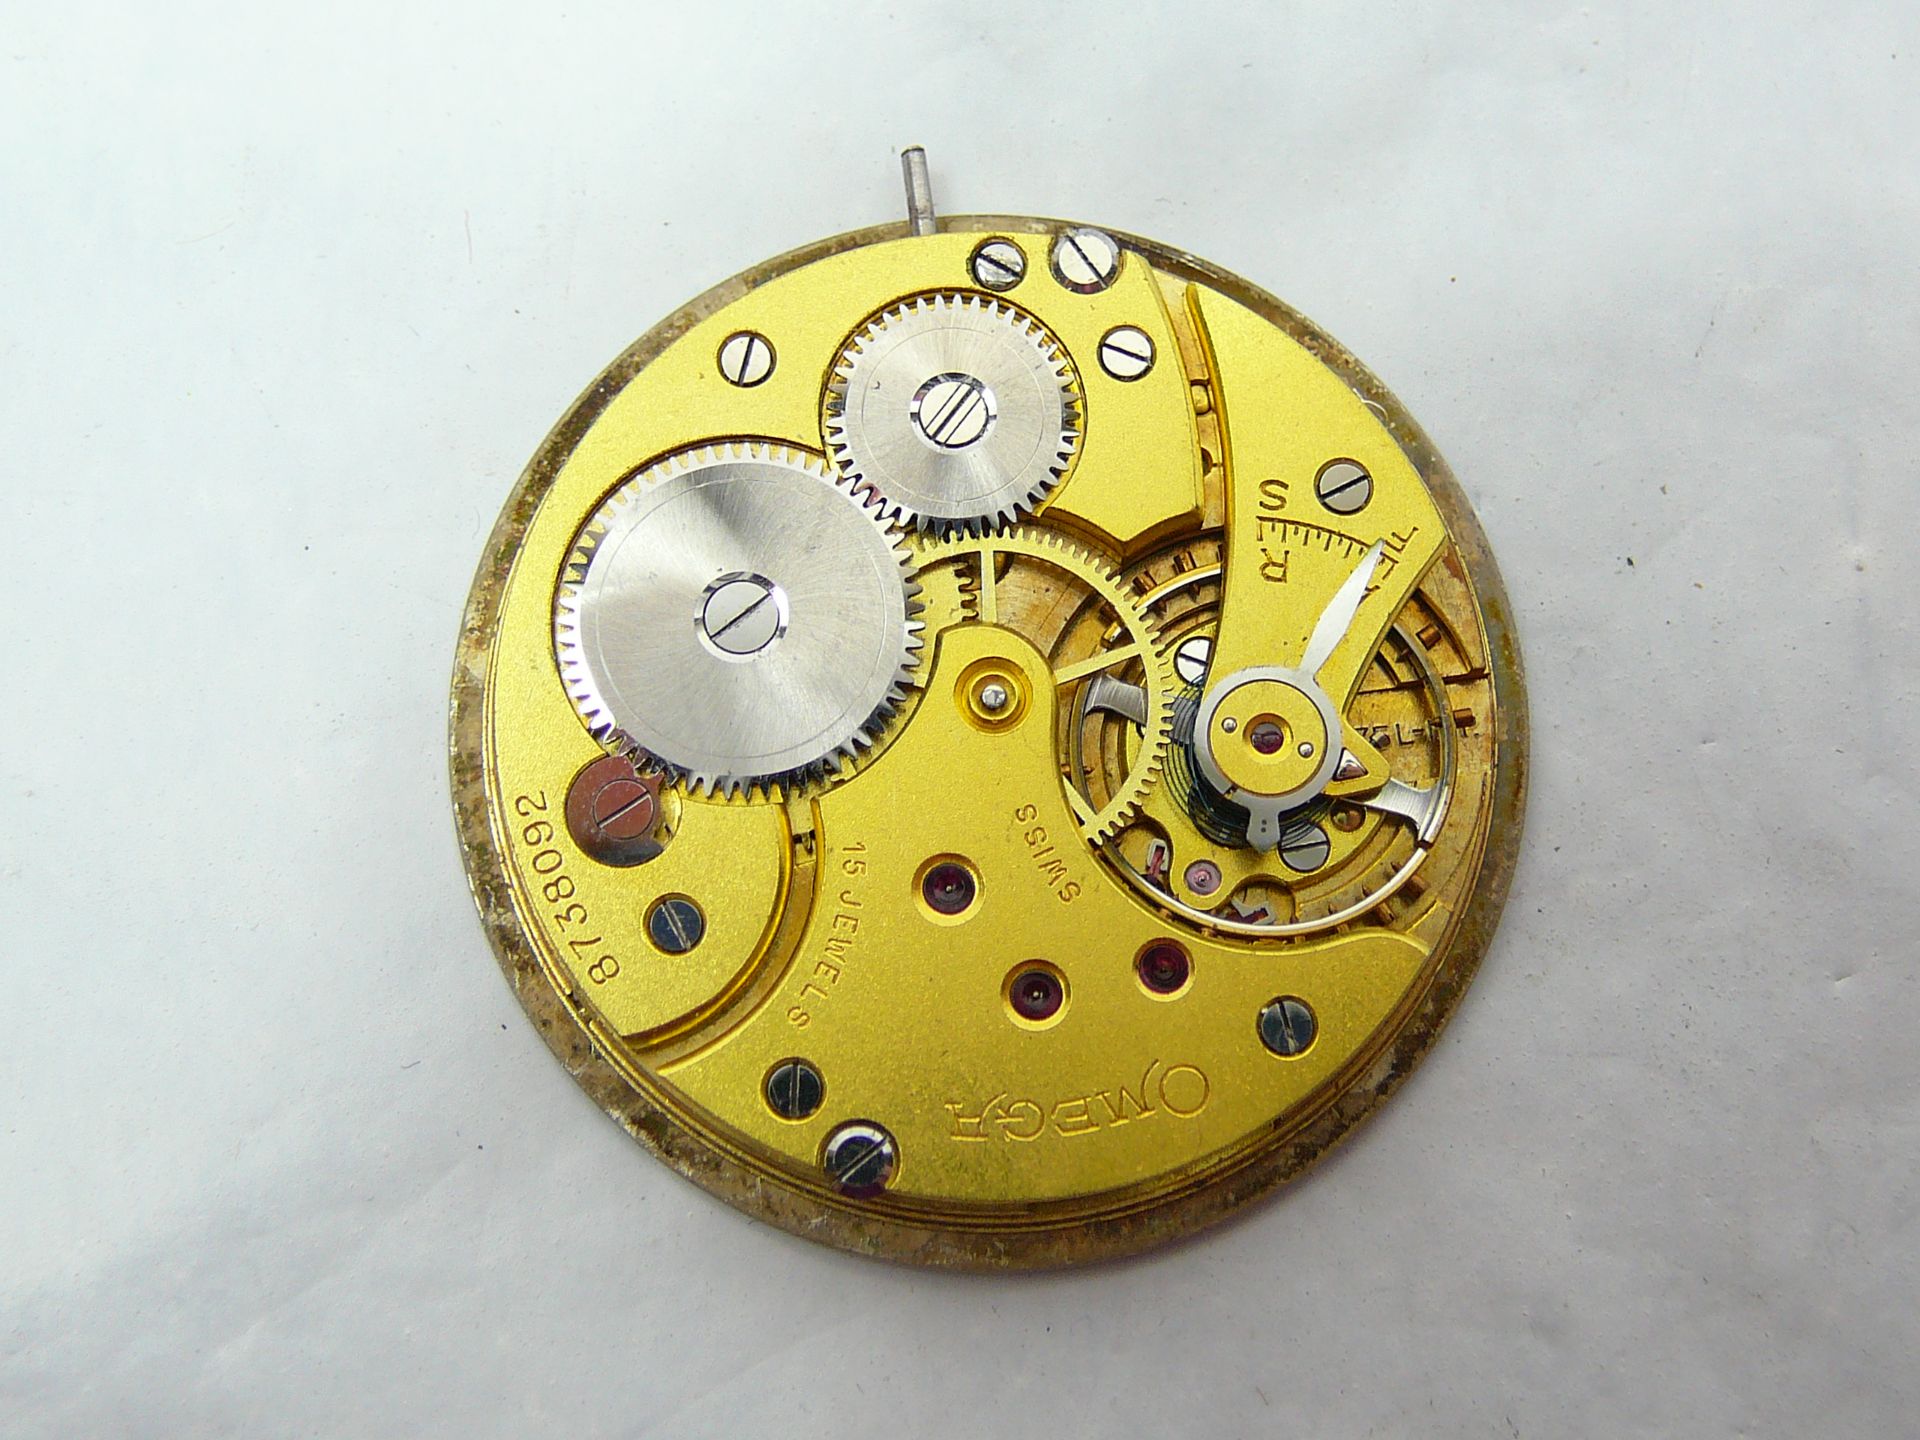 Omega pocketwatch movement - Image 2 of 2